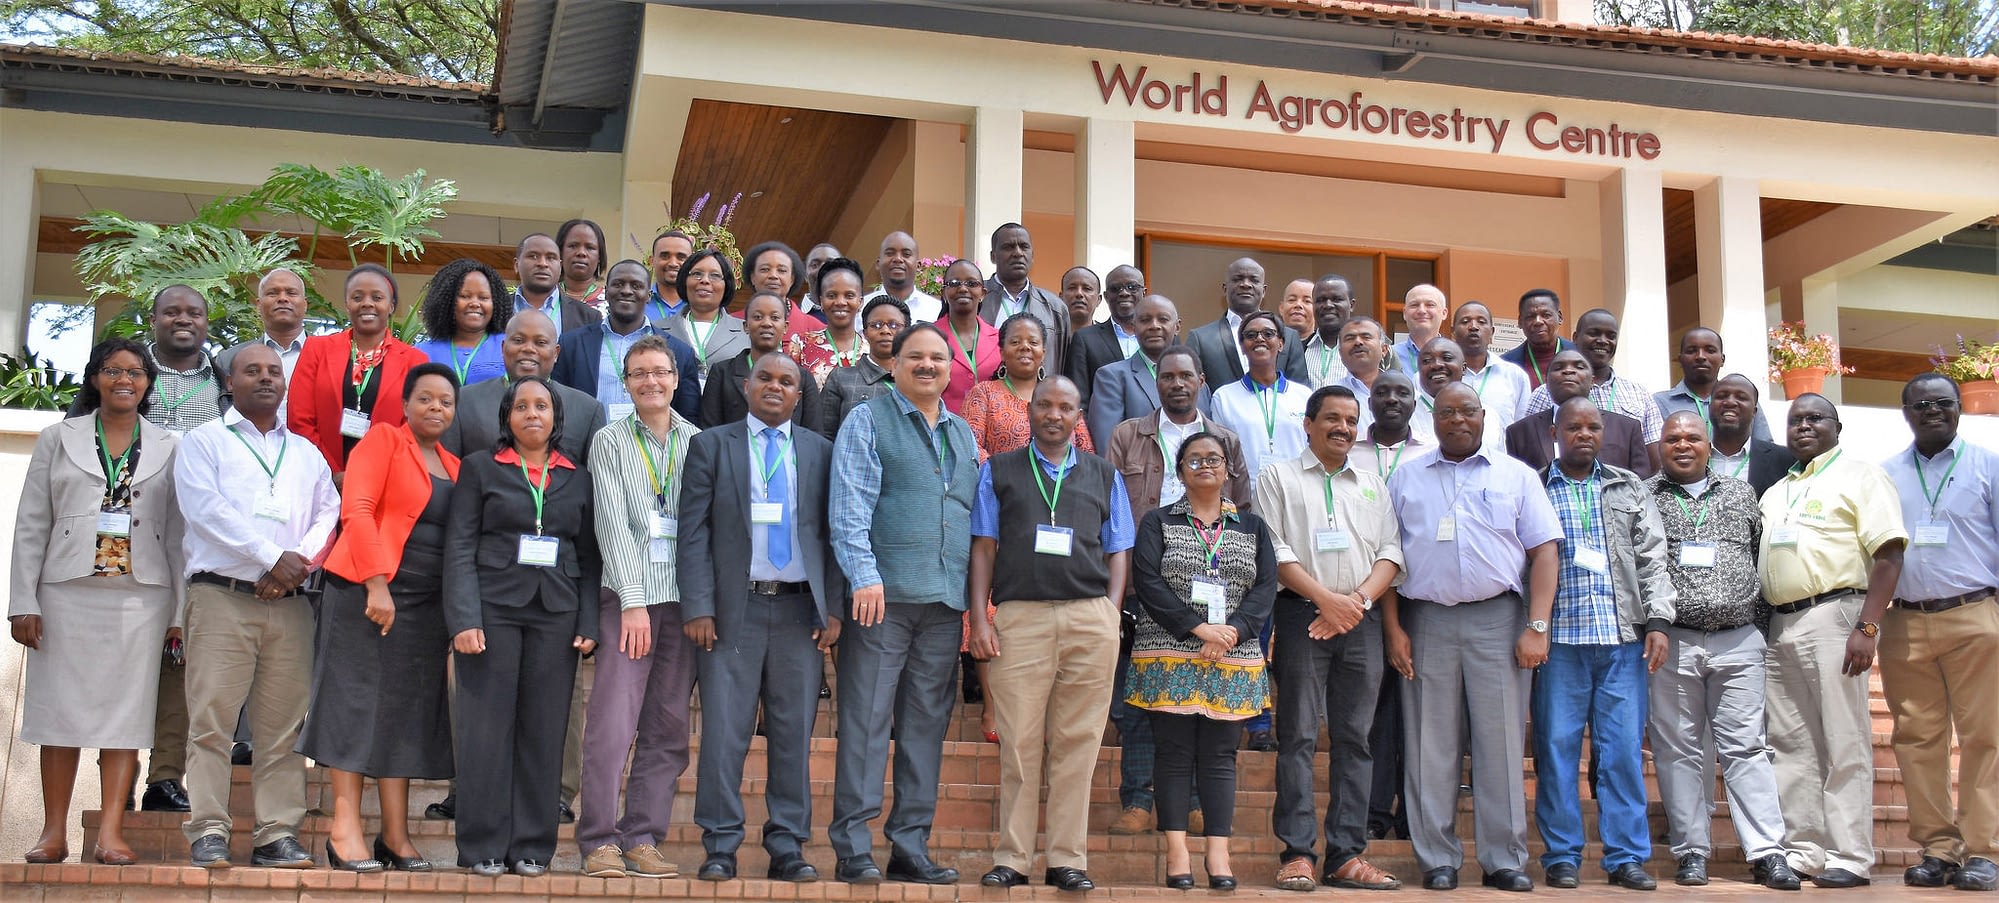 Delegates of the 3-year review conference pose for a group photograph at the ICRAF Campus in Nairobi. (Photo: Joshua Masinde/CIMMYT)